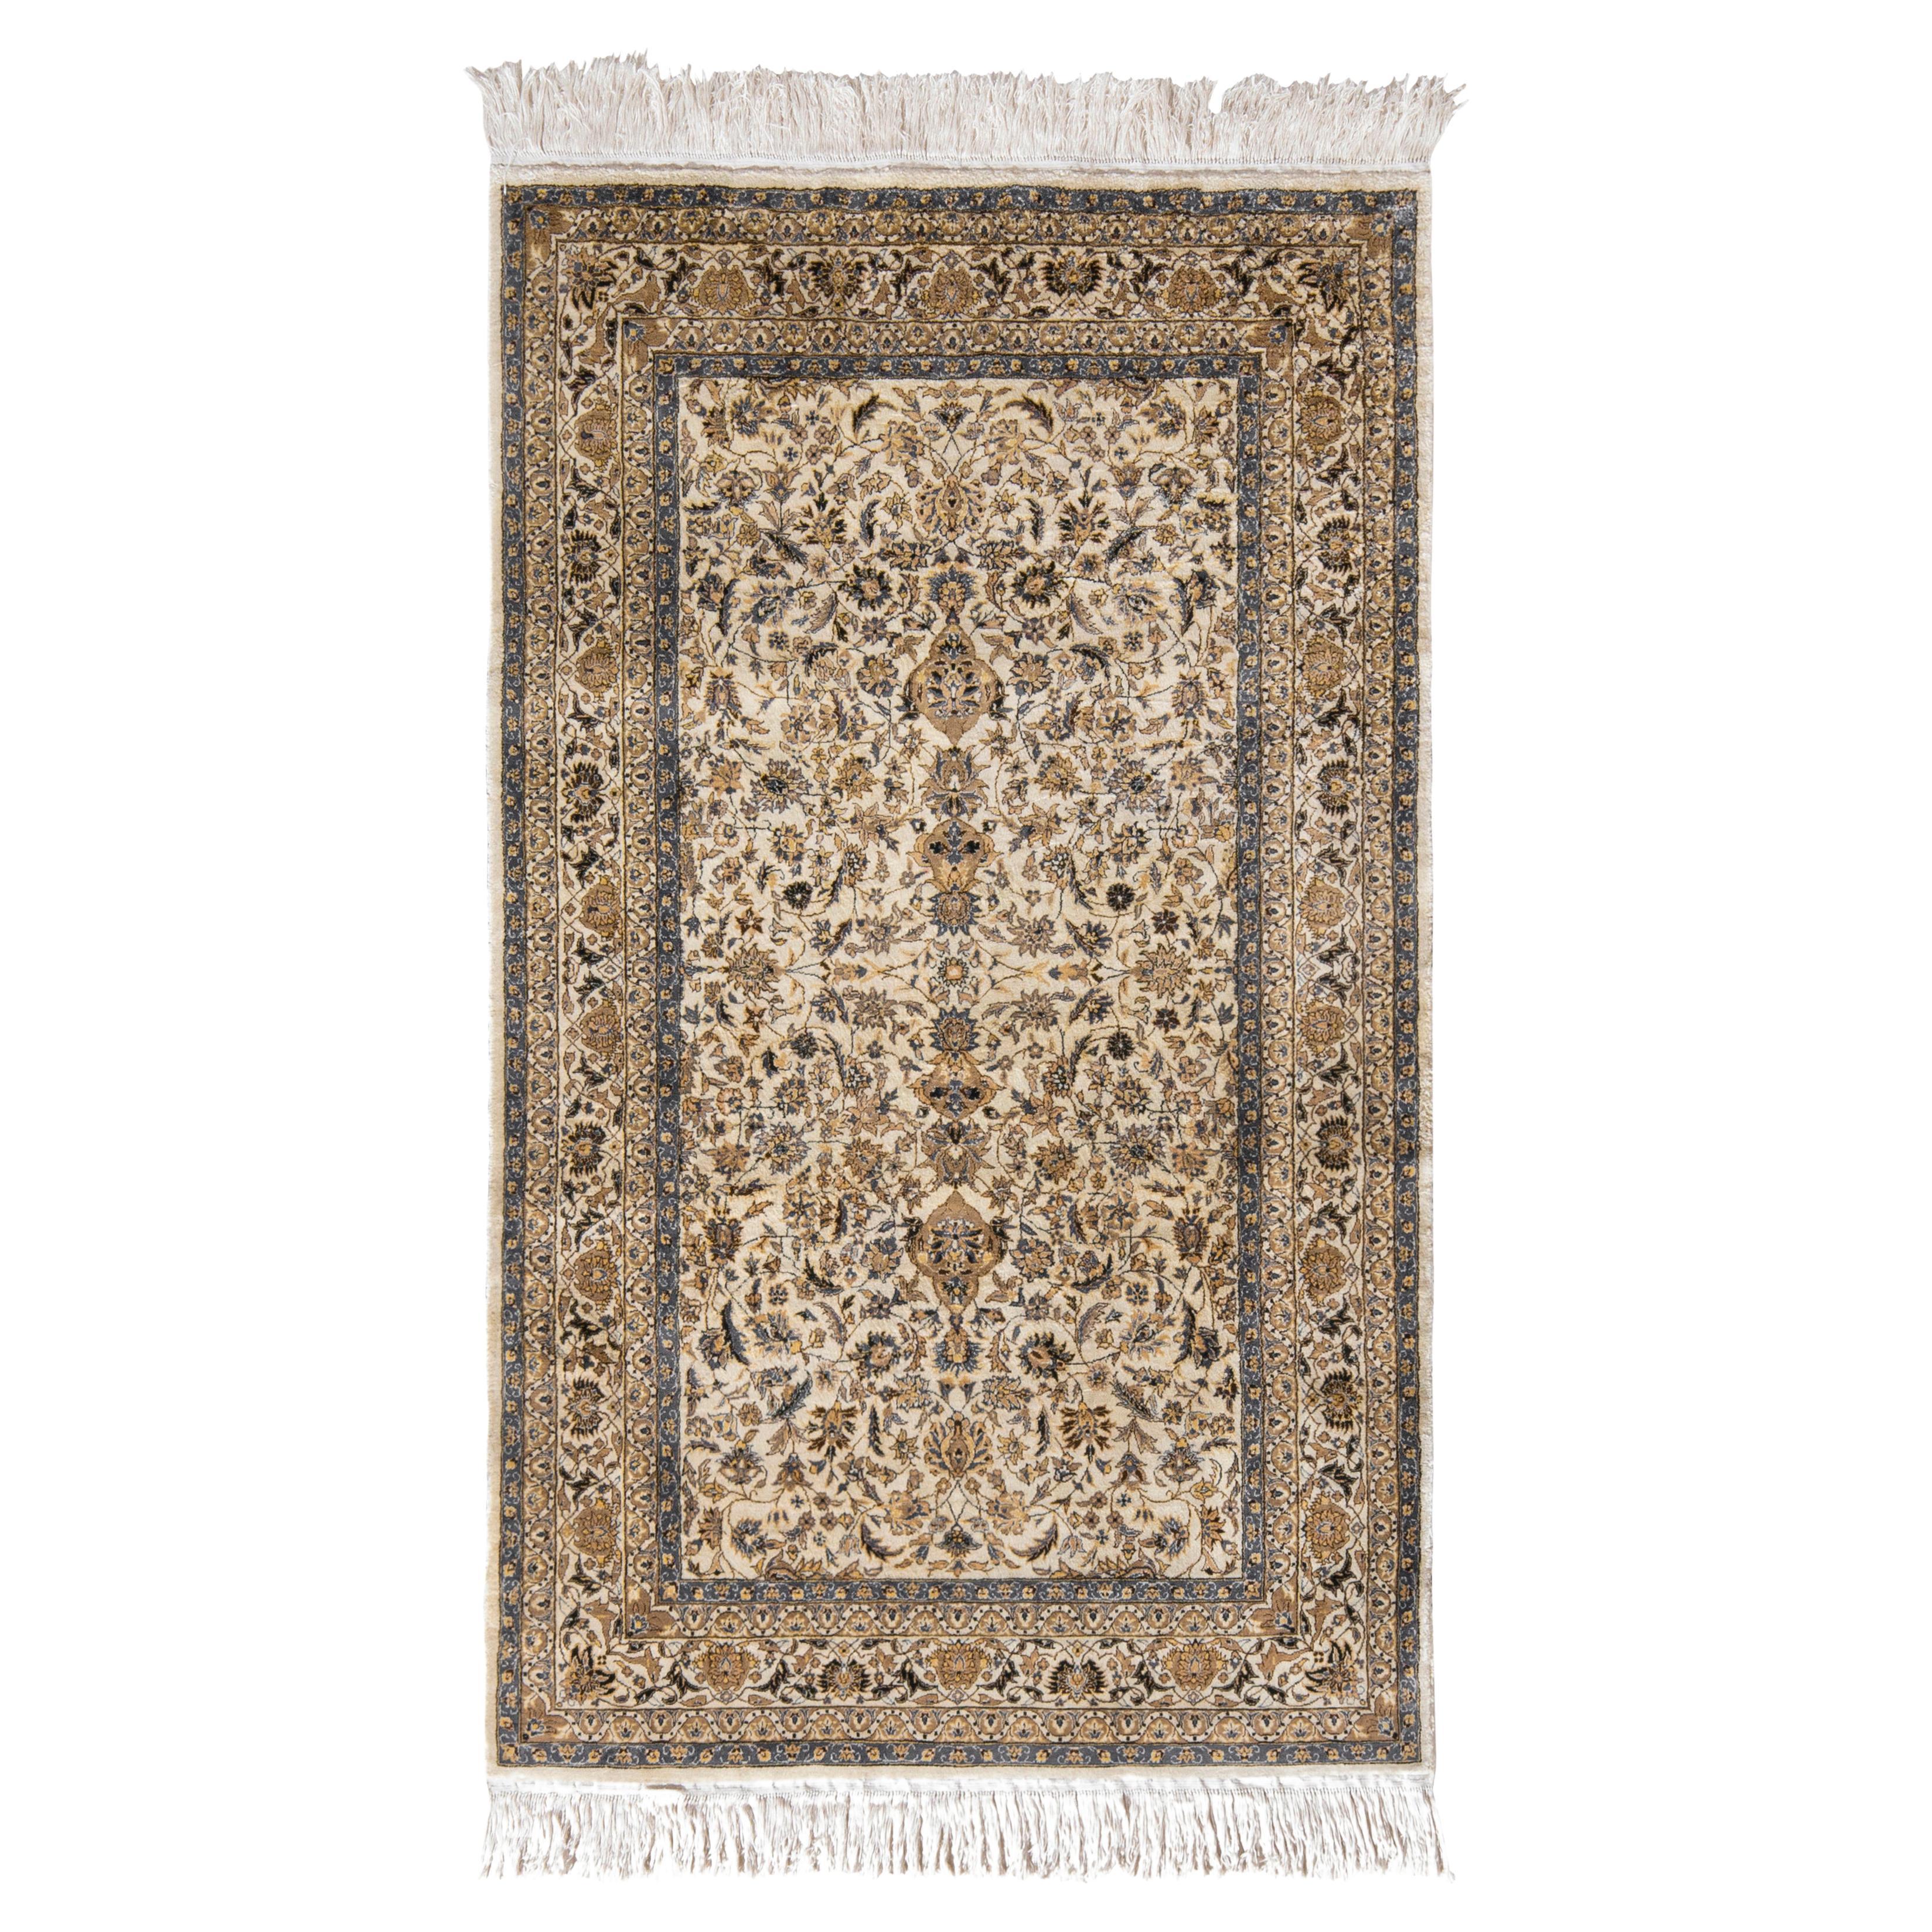 Hand-Knotted Vintage Persian Rug in Beige-Brown Floral Pattern by Rug & Kilim For Sale